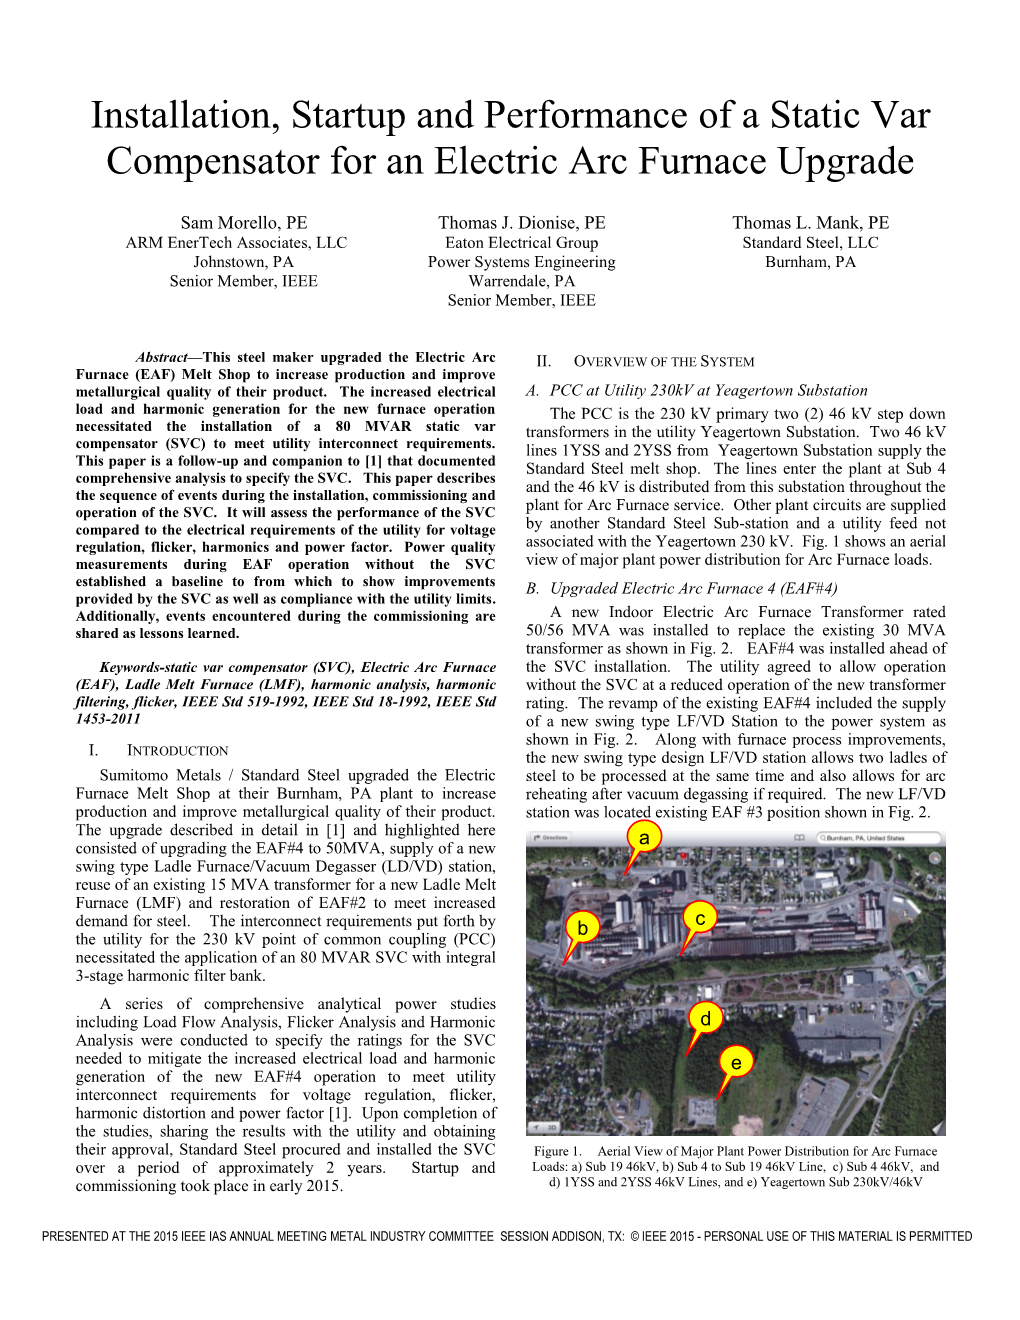 Installation, Startup and Performance of a Static Var Compensator for an Electric Arc Furnace Upgrade